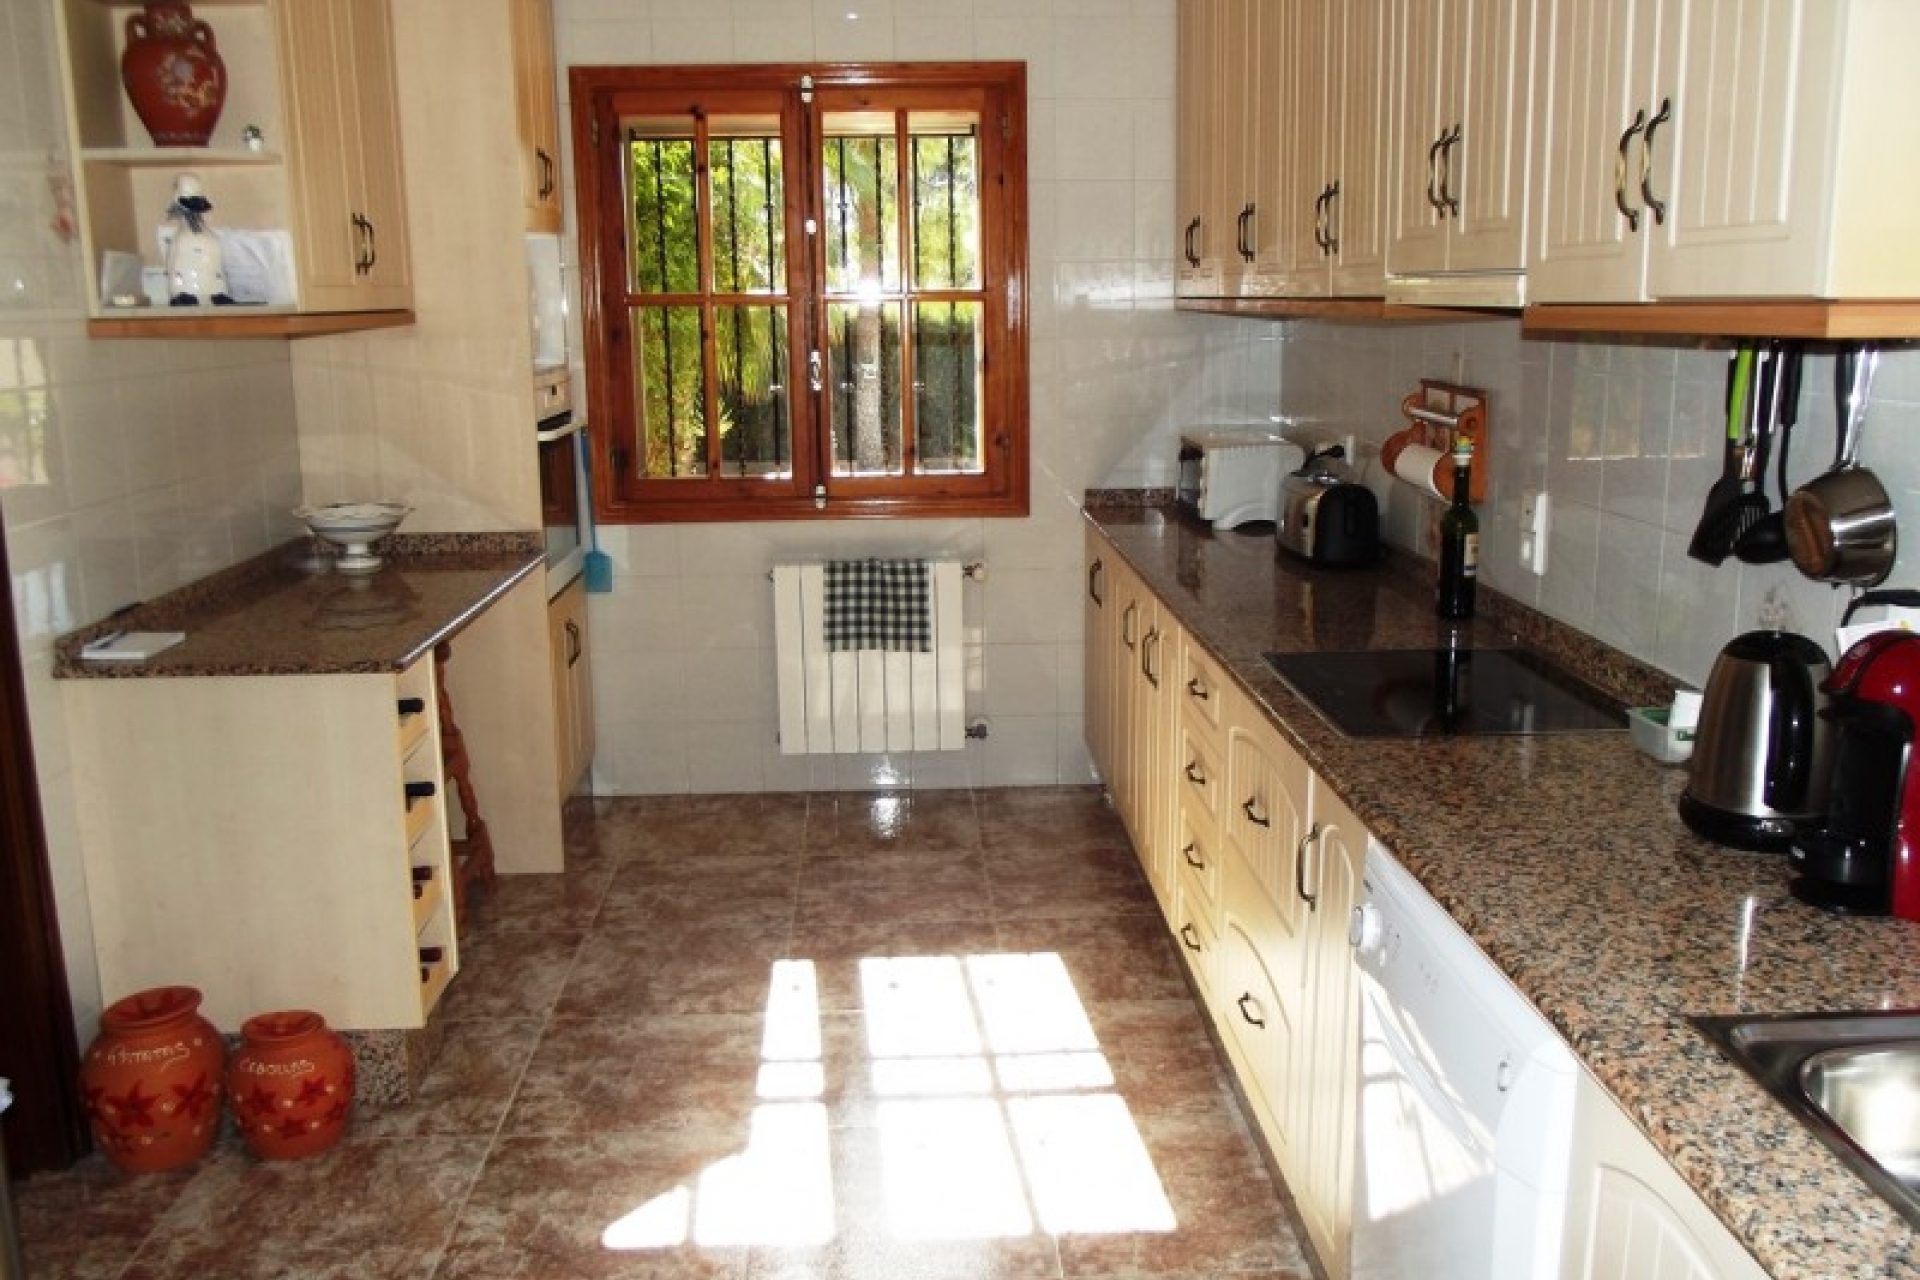 Bargain exclusive detached villa for sale in a gated community